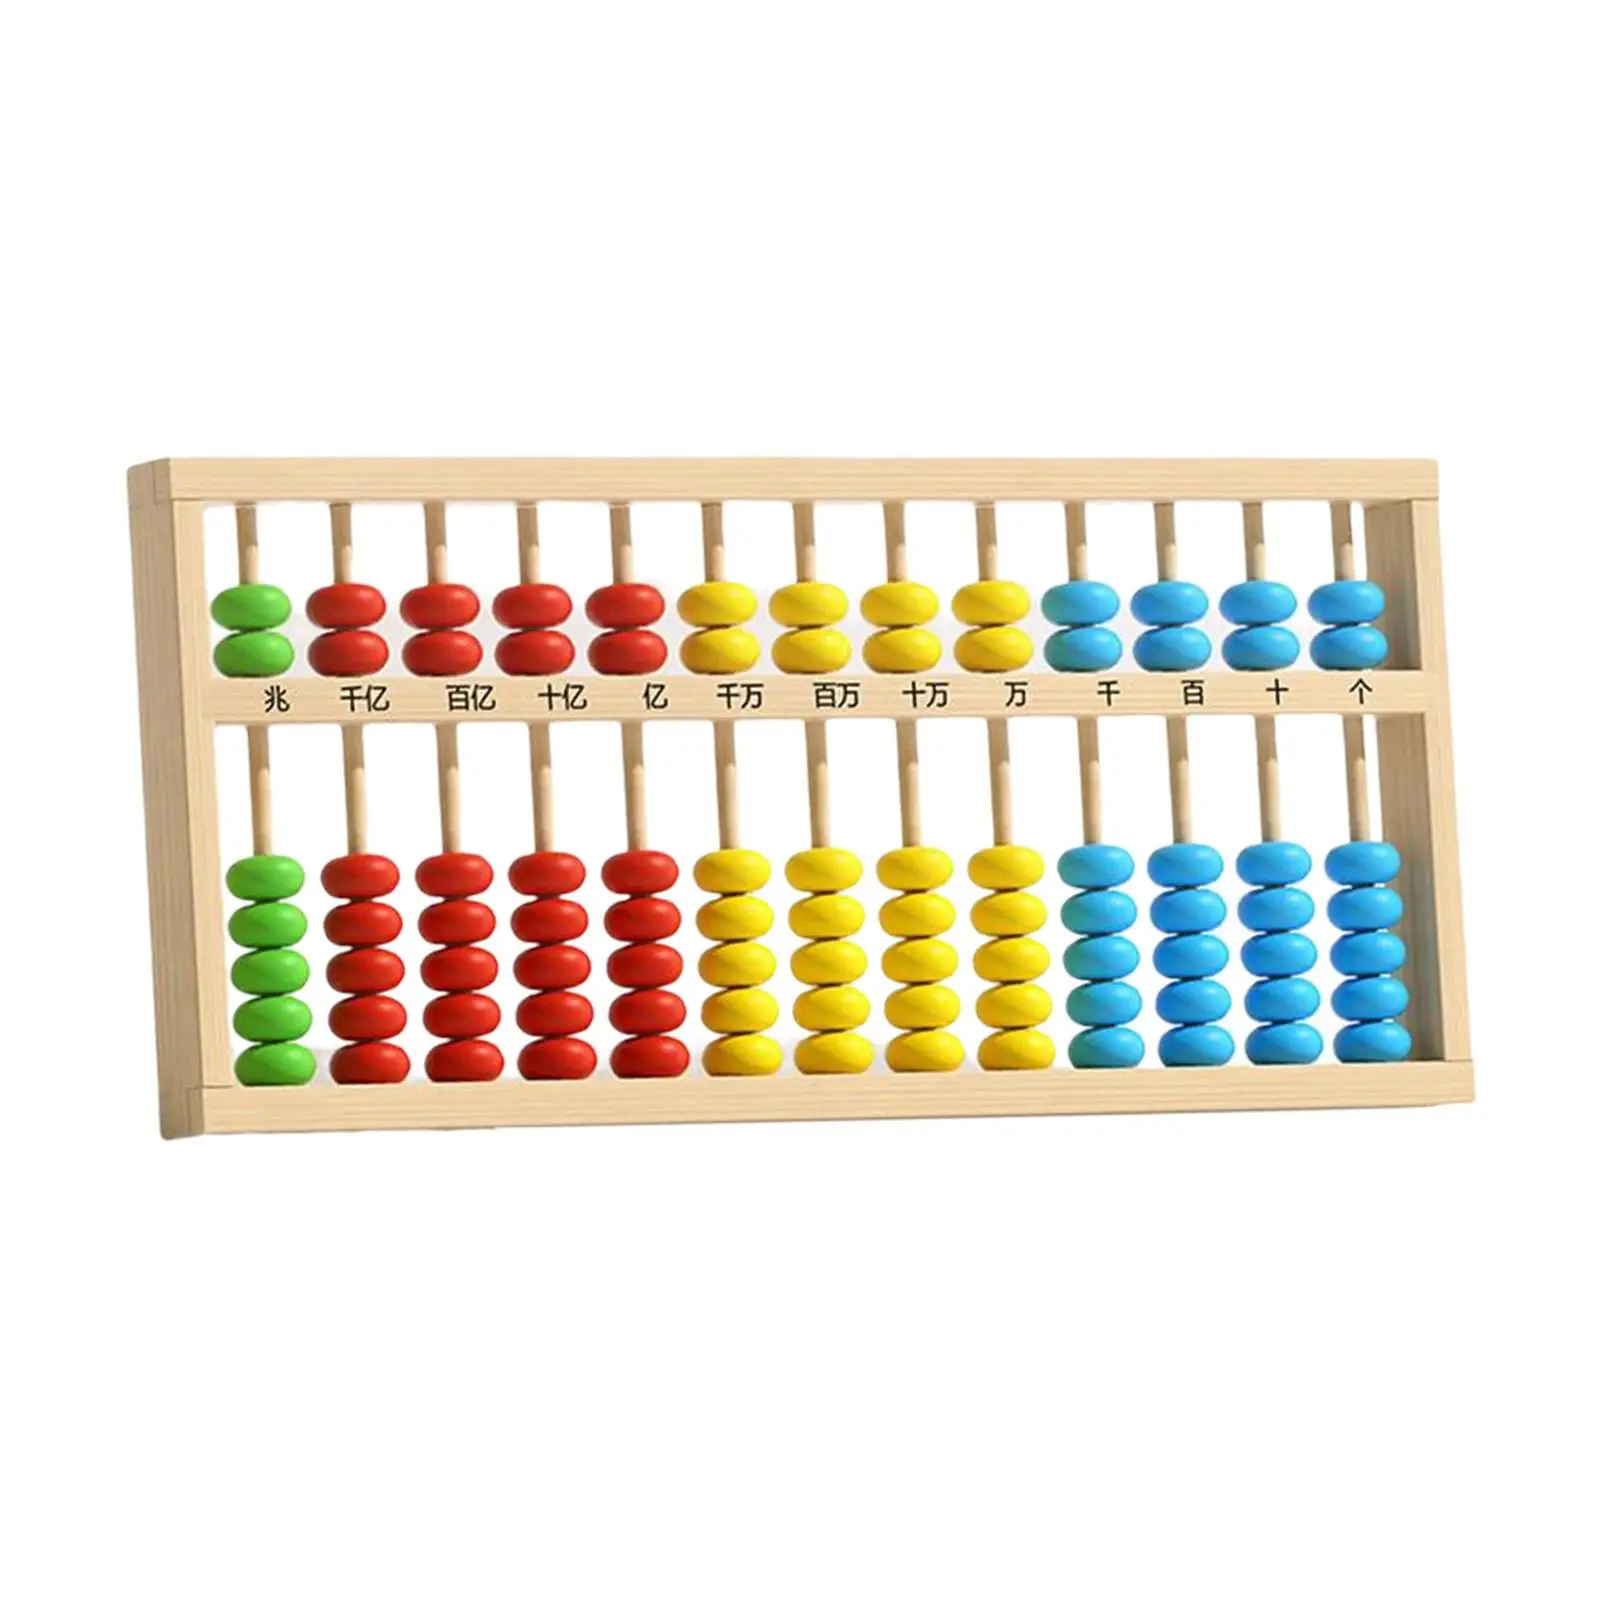 Wooden Abacus Educational Toy Math Manipulatives Abacus Teaching Frame Beads Game Mathematics Toy for Early Childhood Education